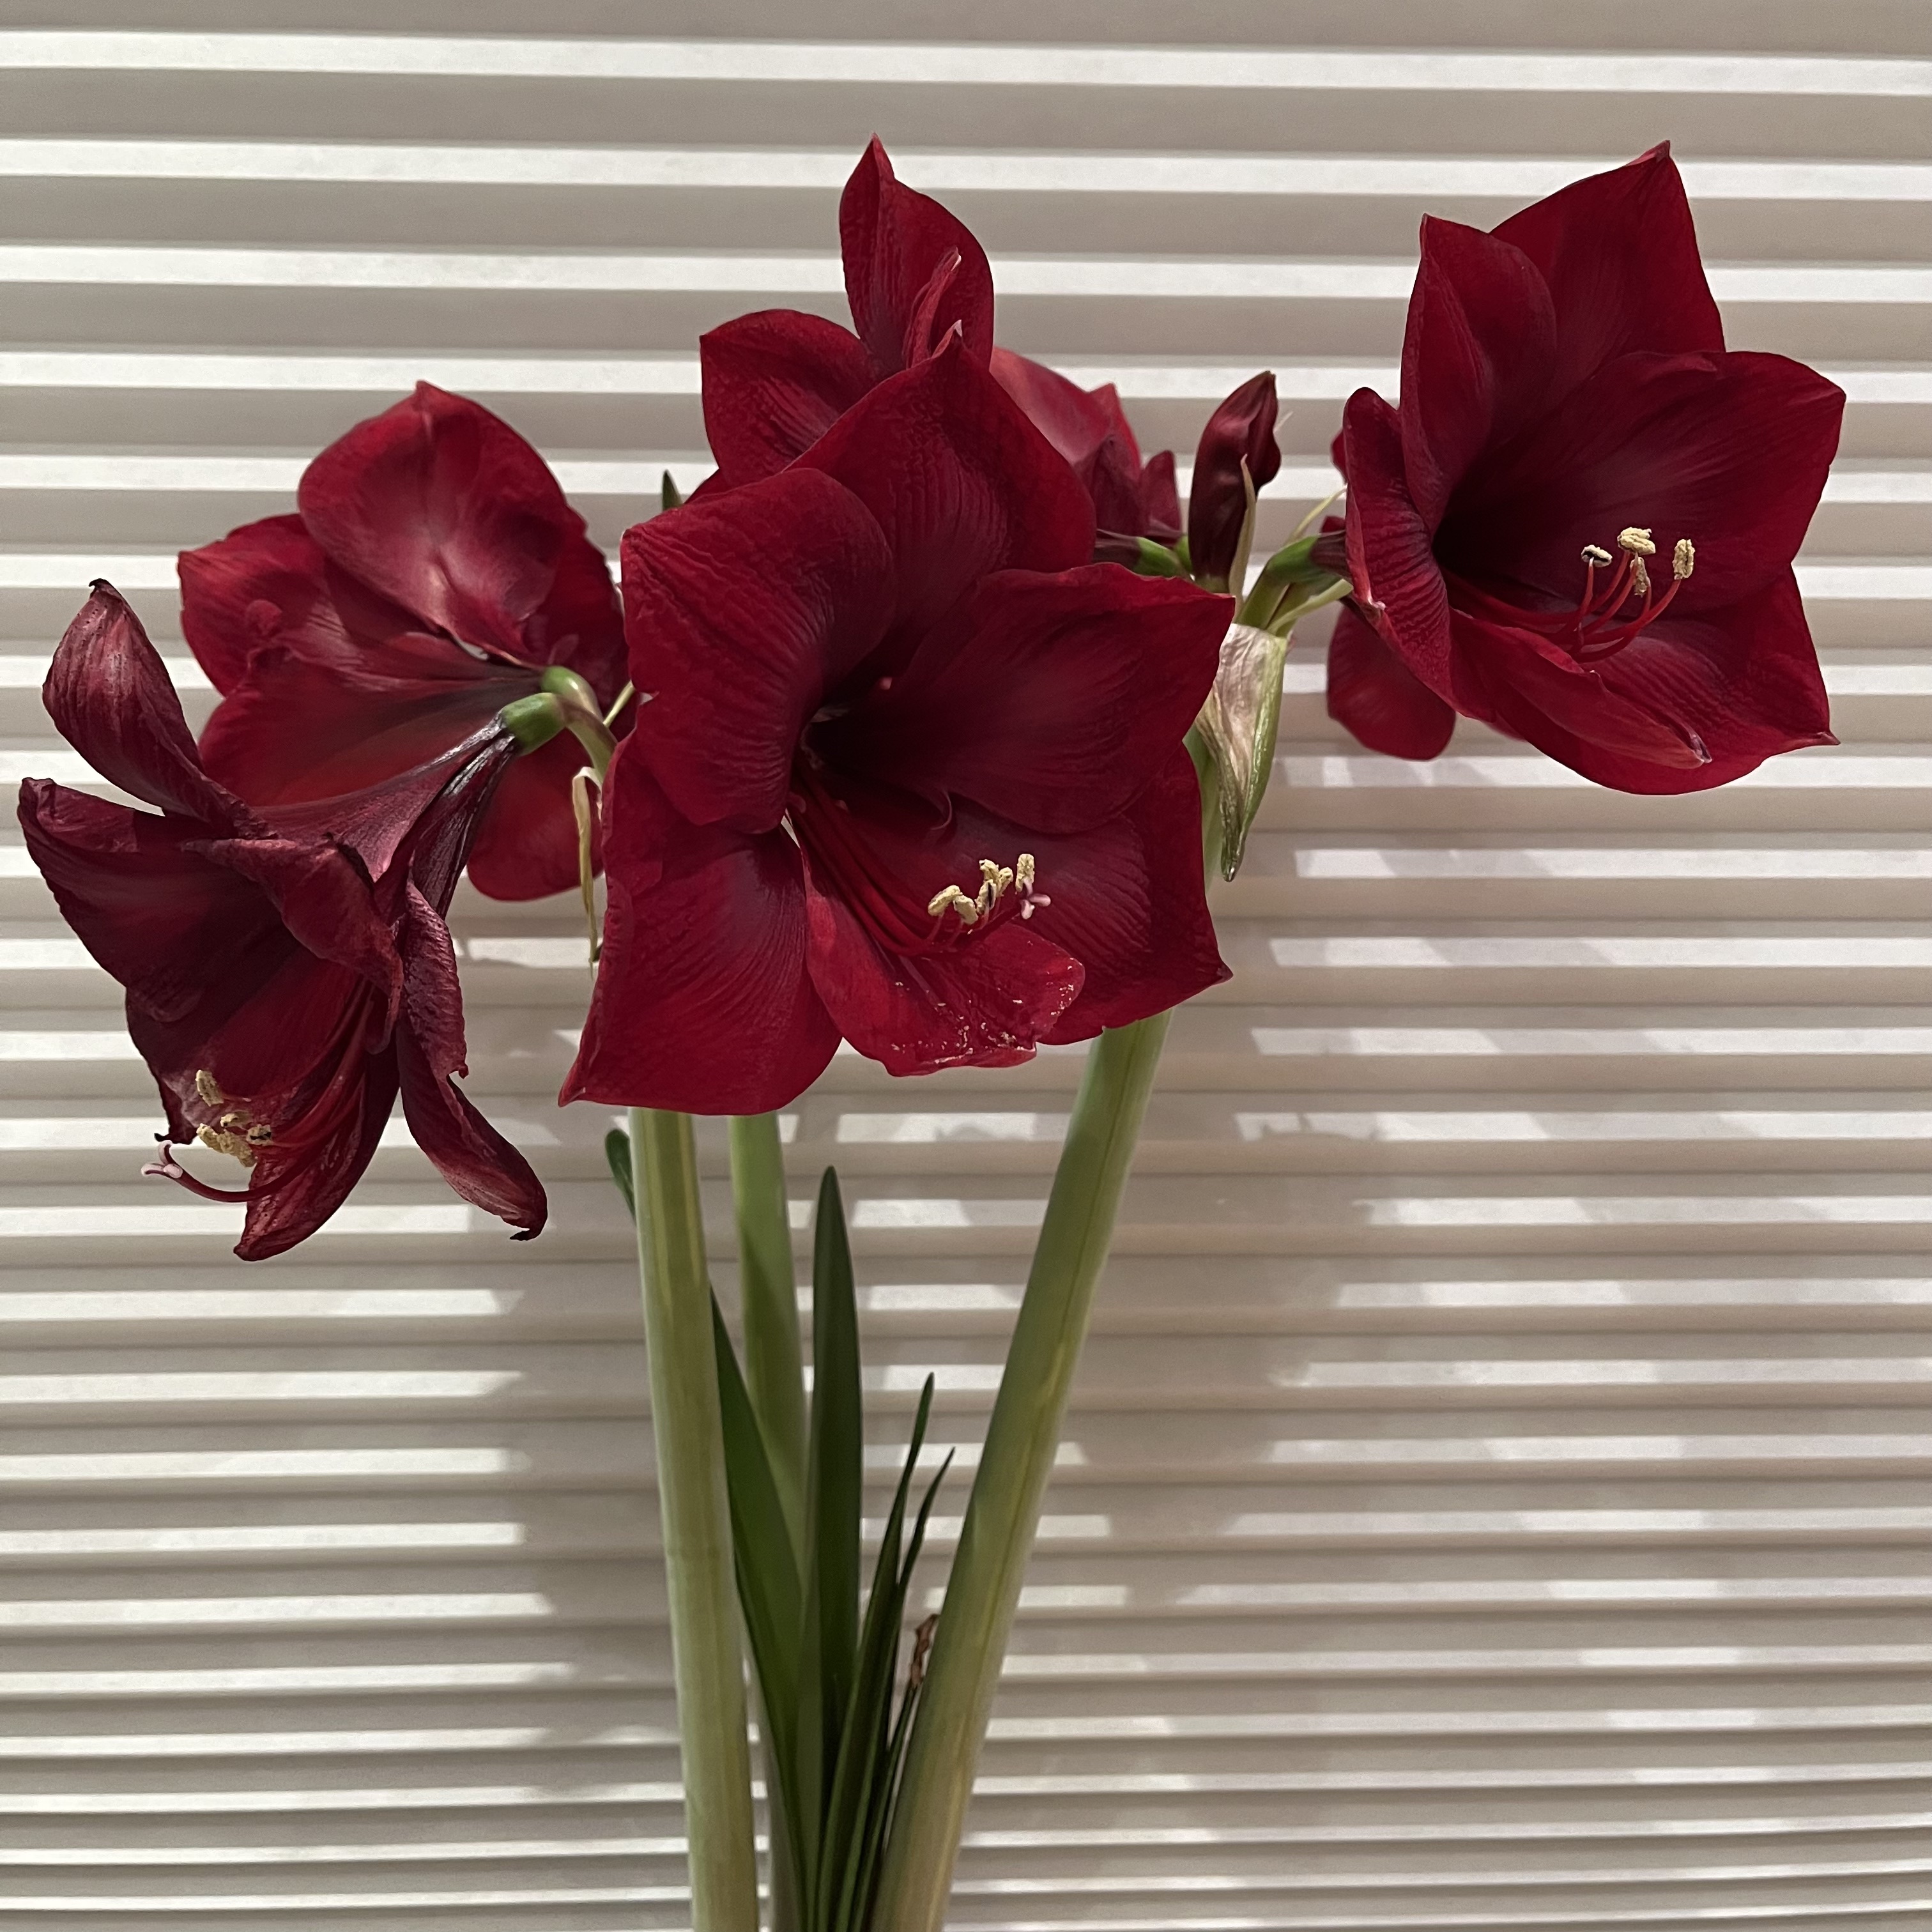 What a difference a week makes. Amaryllis really blooming now. Prospect Heights, Brooklyn.